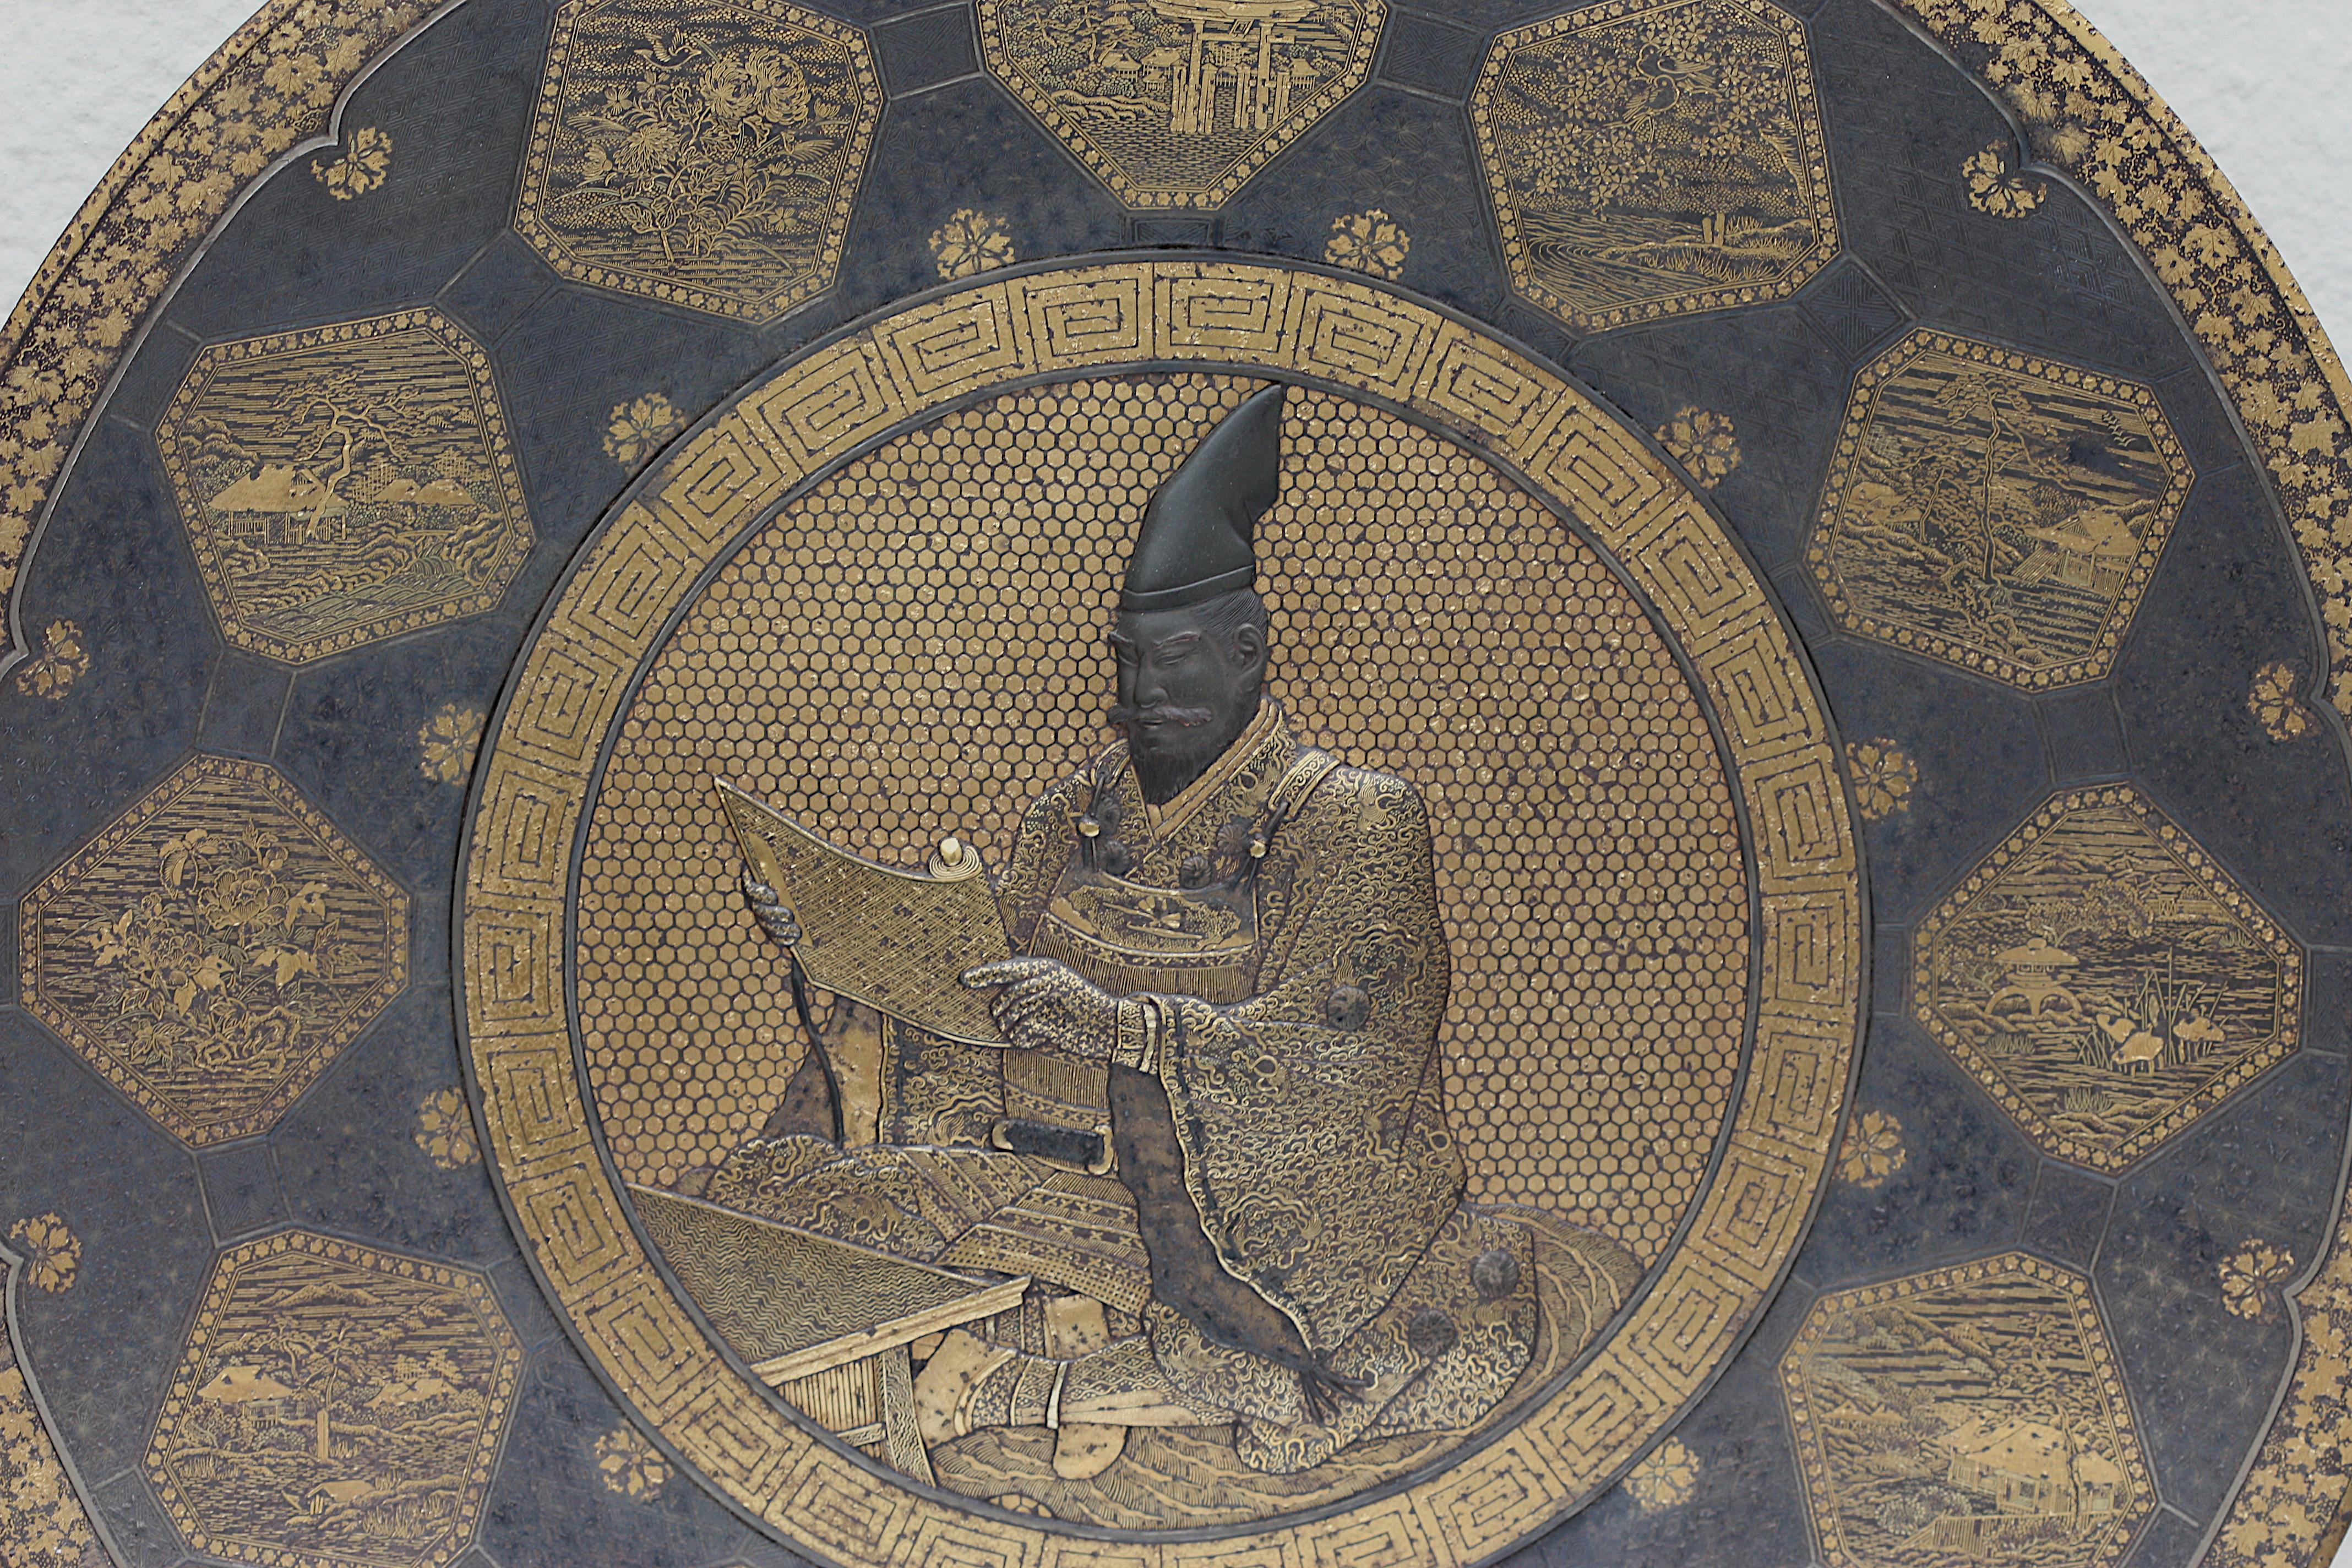 A Fine Japanese Komai Inlaid-Iron plate. 
Decorated in two shades of gold and silver 
Meiji Period, Late 19th Century
Seal mark of Komai Otojiro
Measure: 11.87 in. (30.16 cm.) diameter.
 